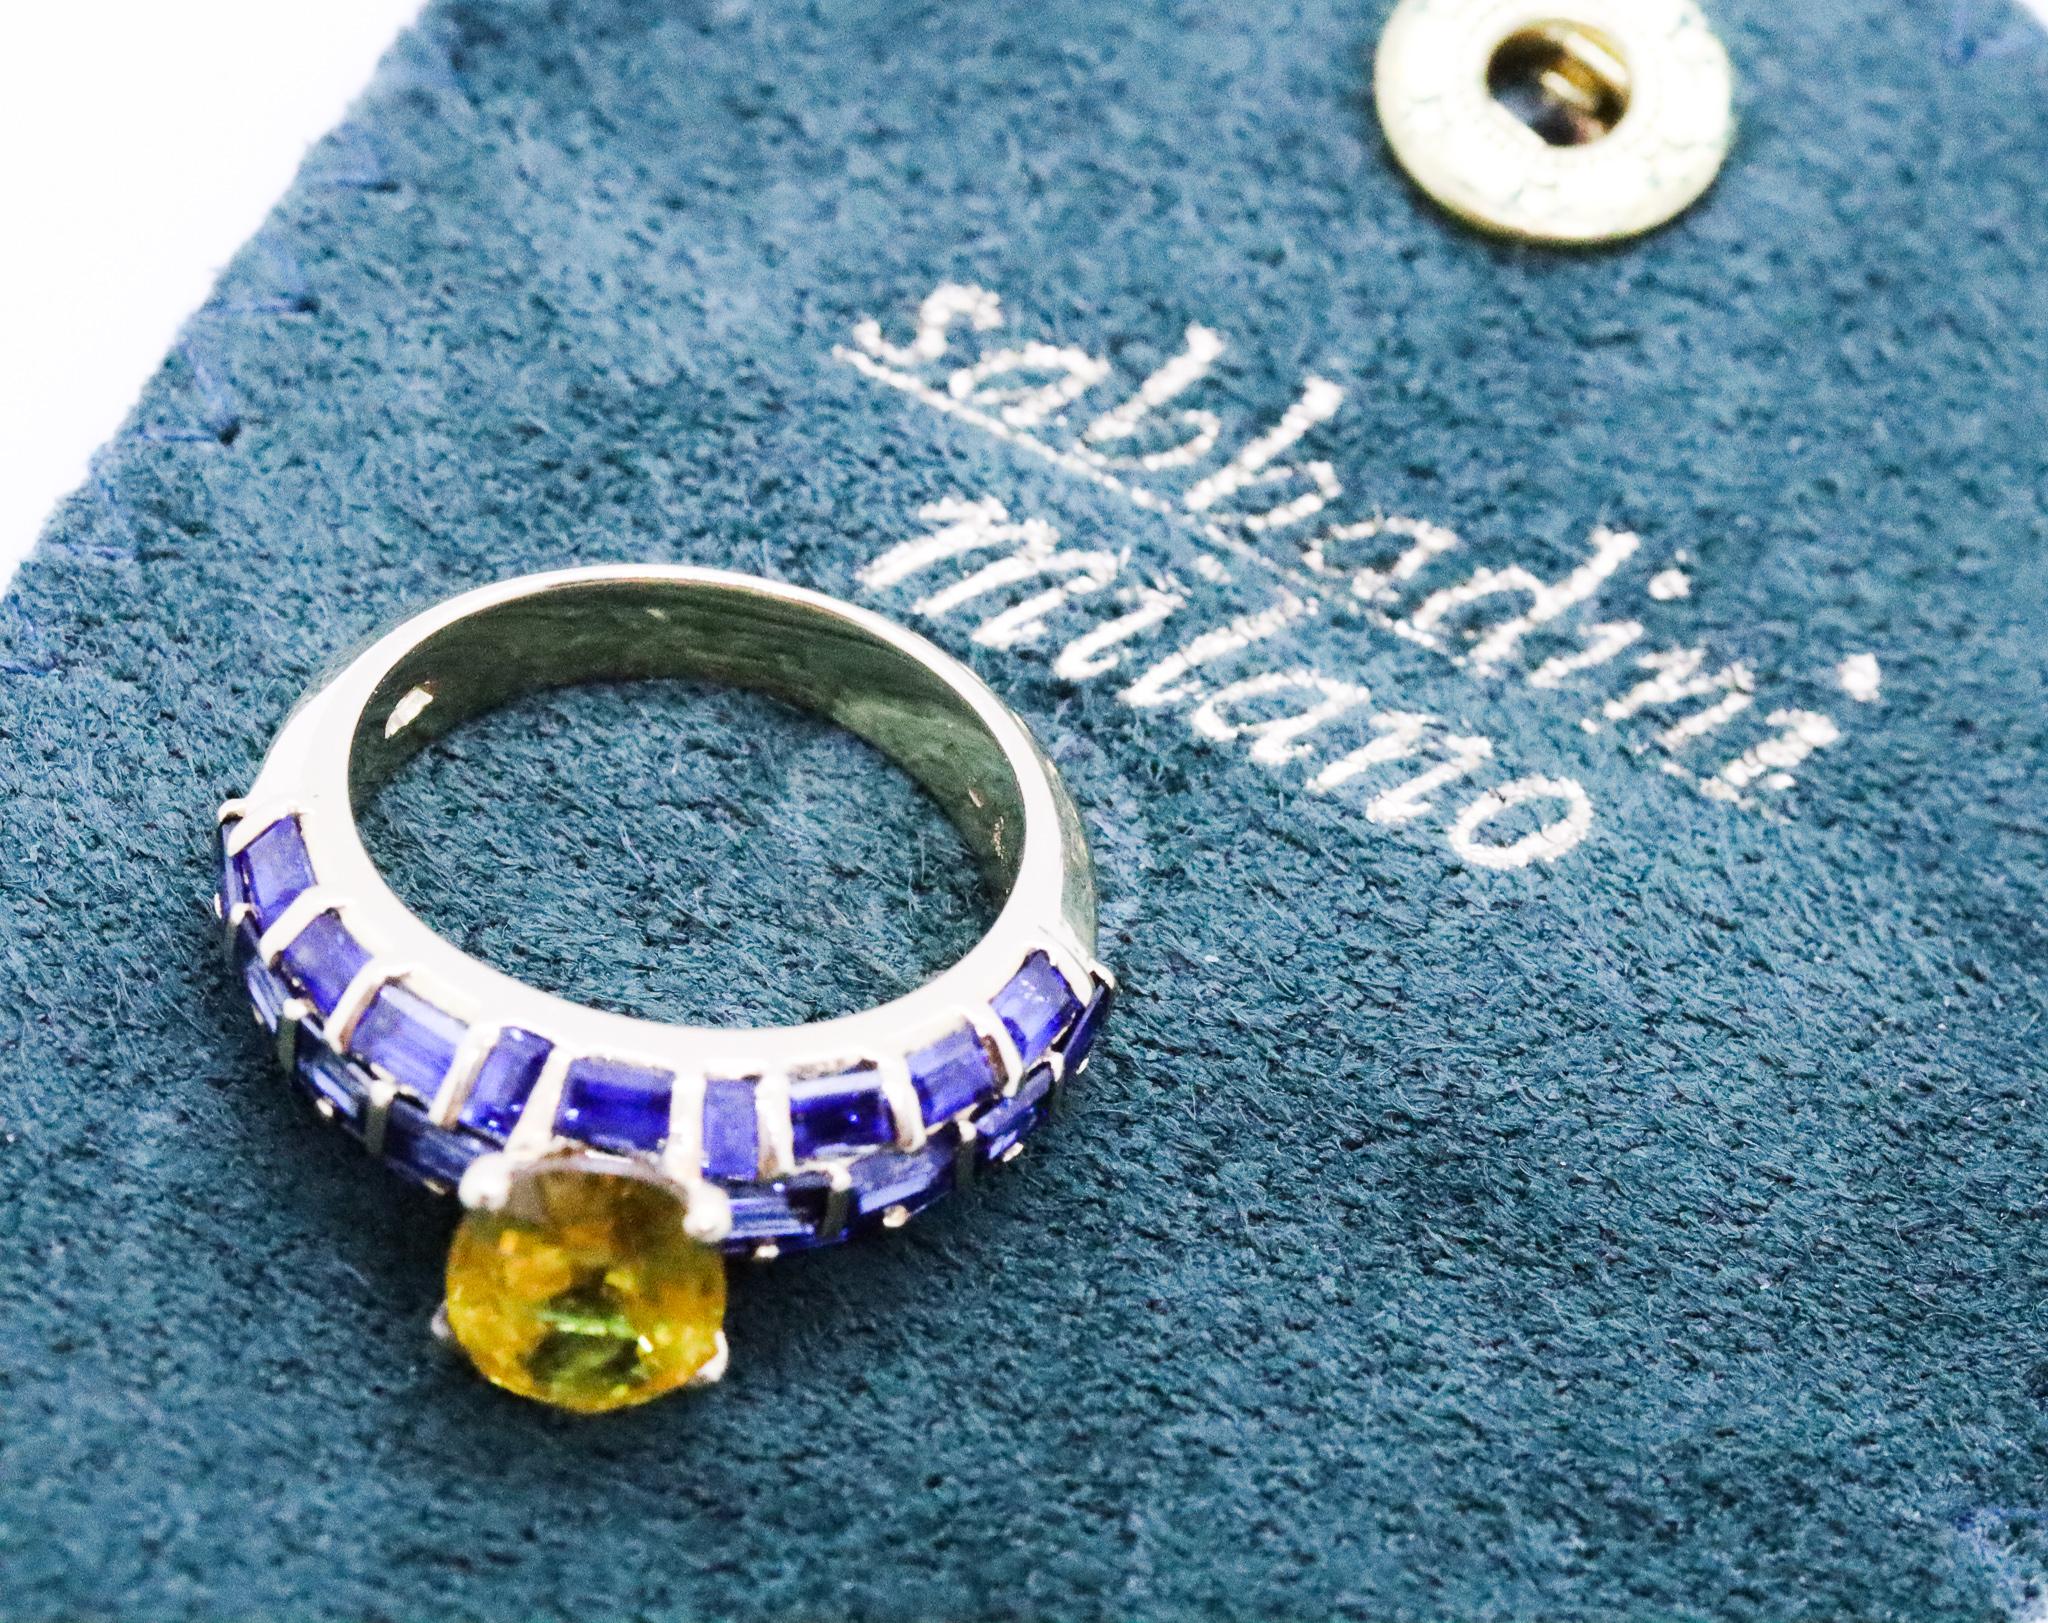 Sabbadini Milano Jeweled Ring 18kt Gold with 4.49 Cts Blue and Yellow Sapphires 4